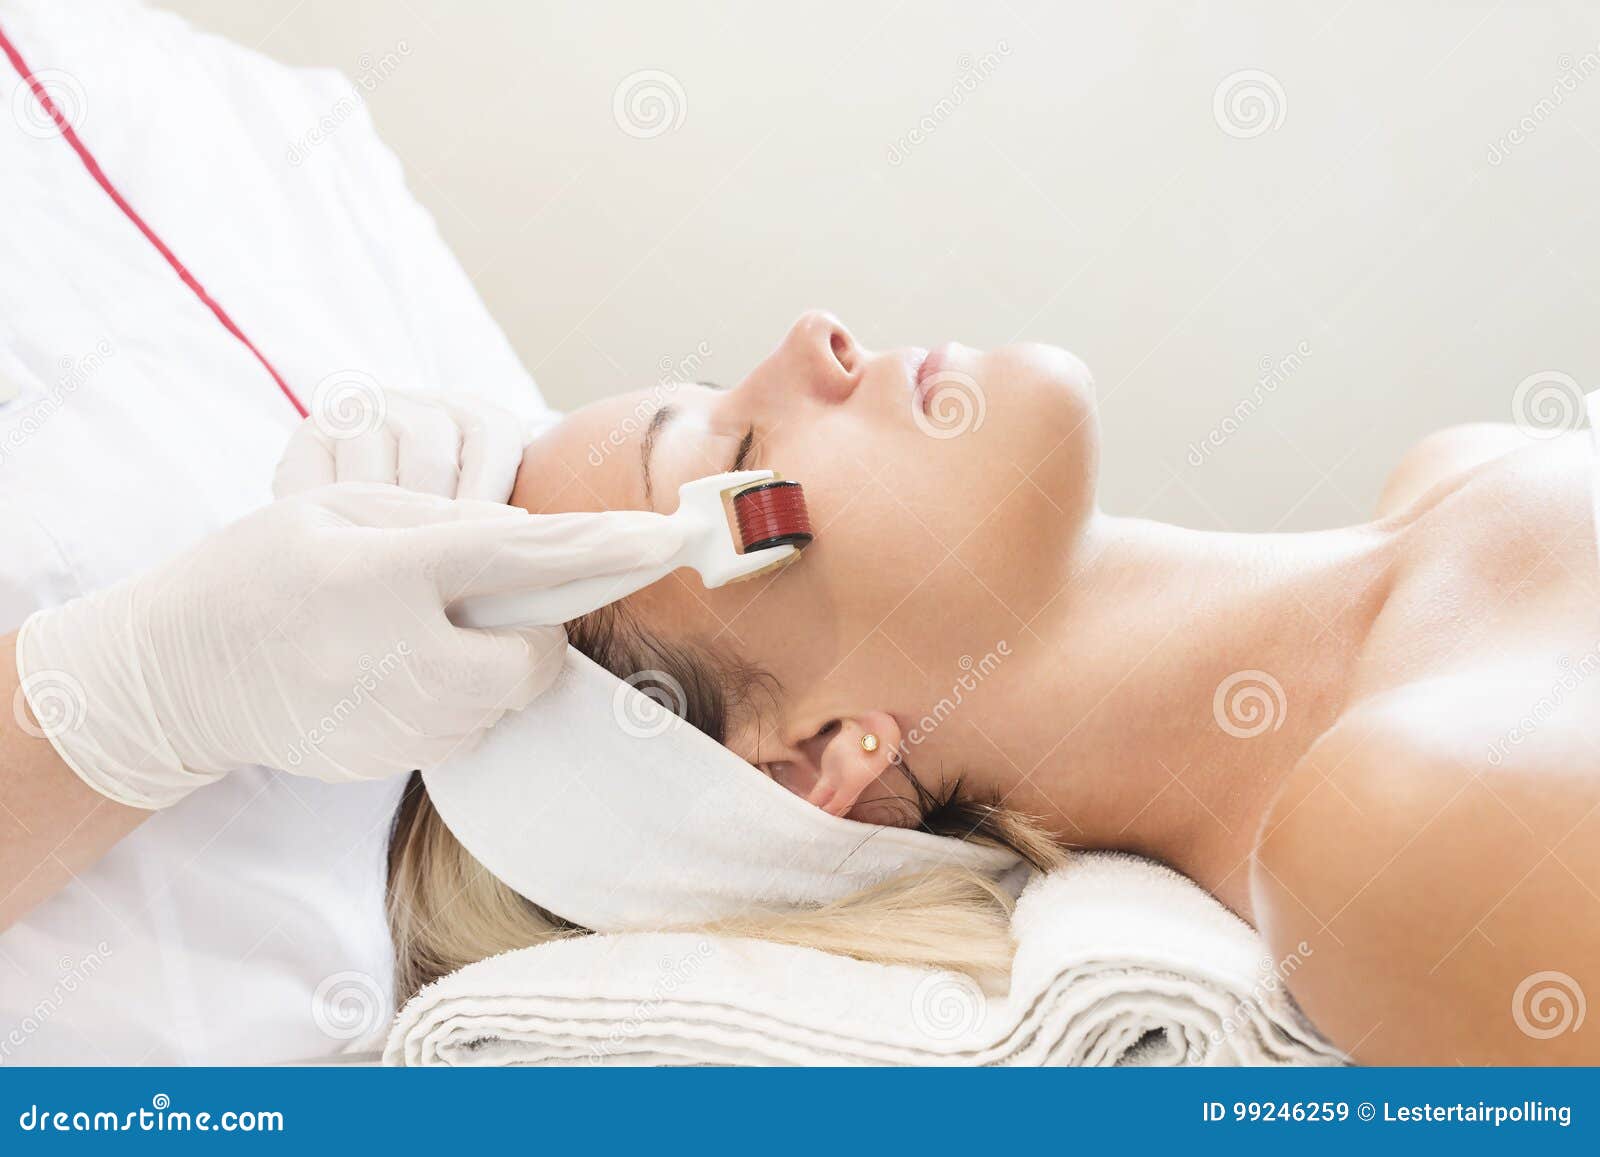 the woman undergoes the procedure of medical micro needle therapy